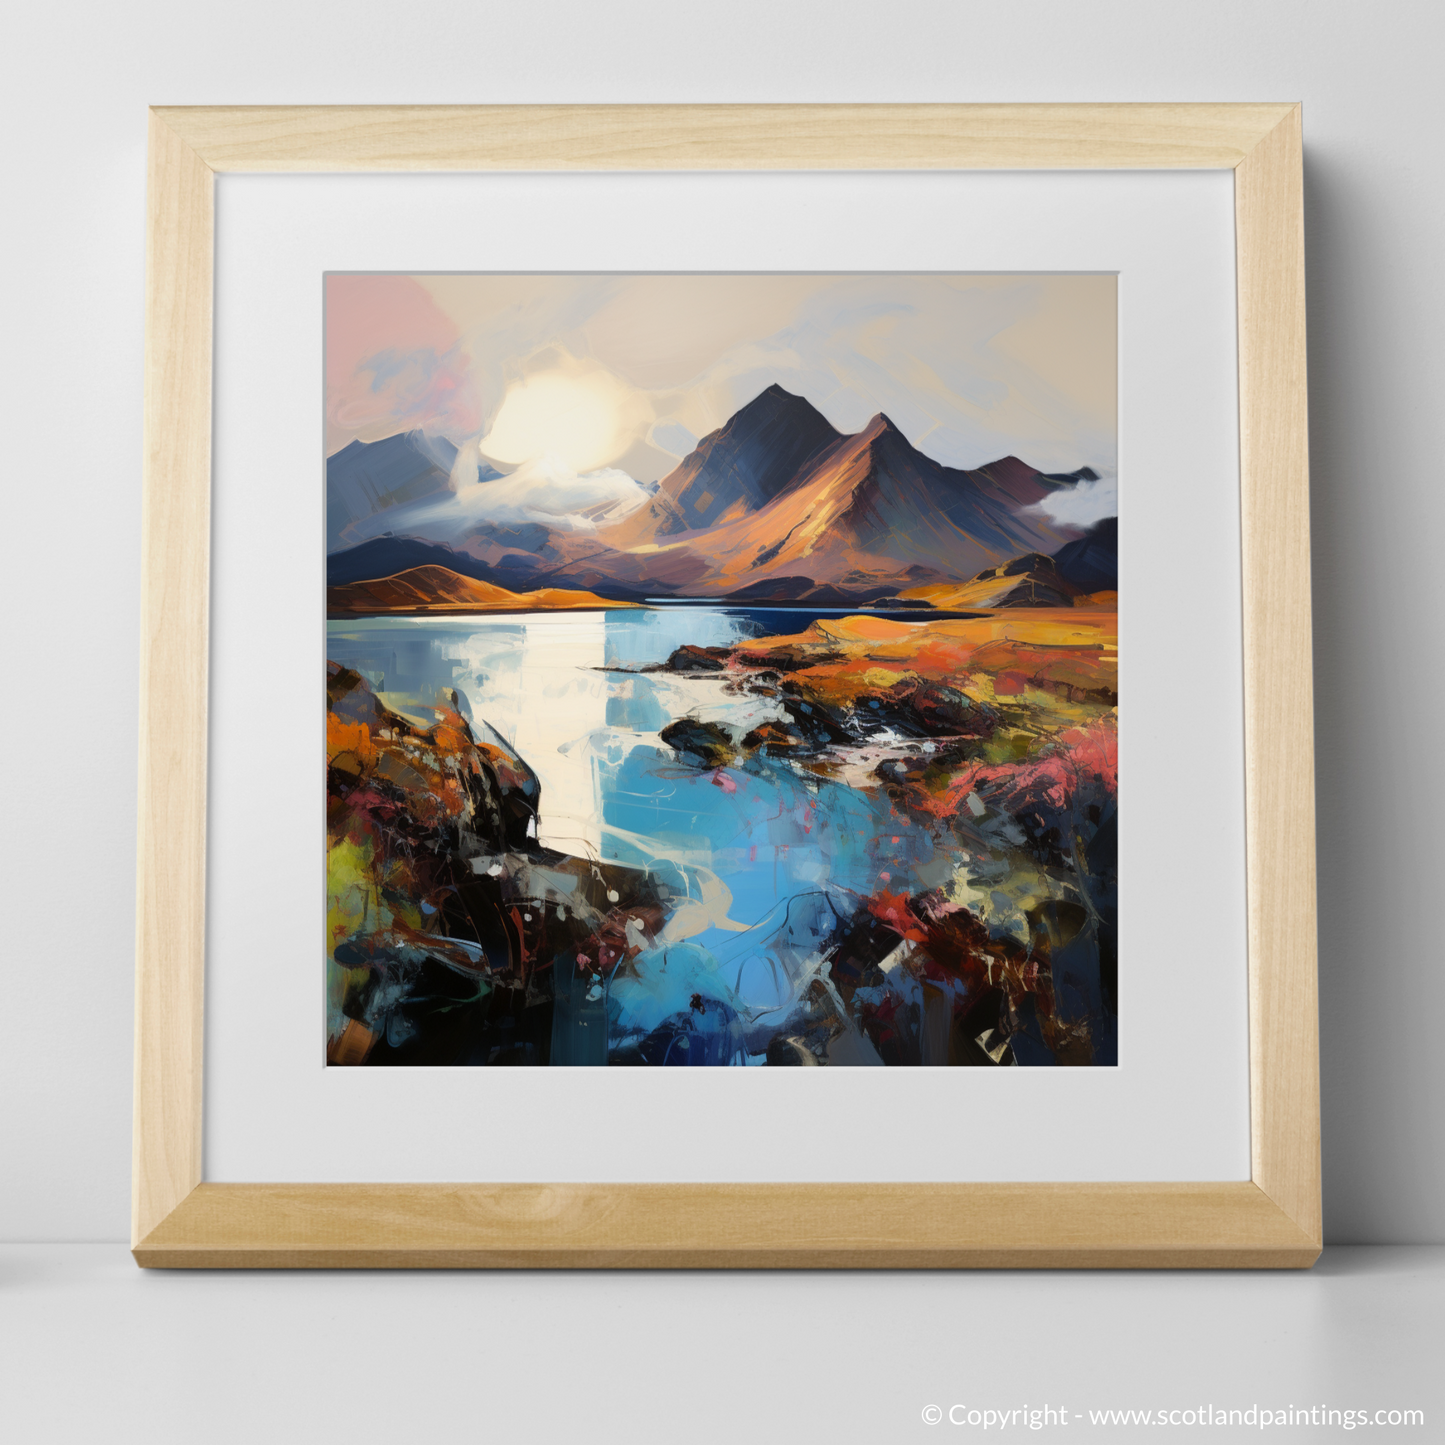 Art Print of The Cuillin, Isle of Skye with a natural frame